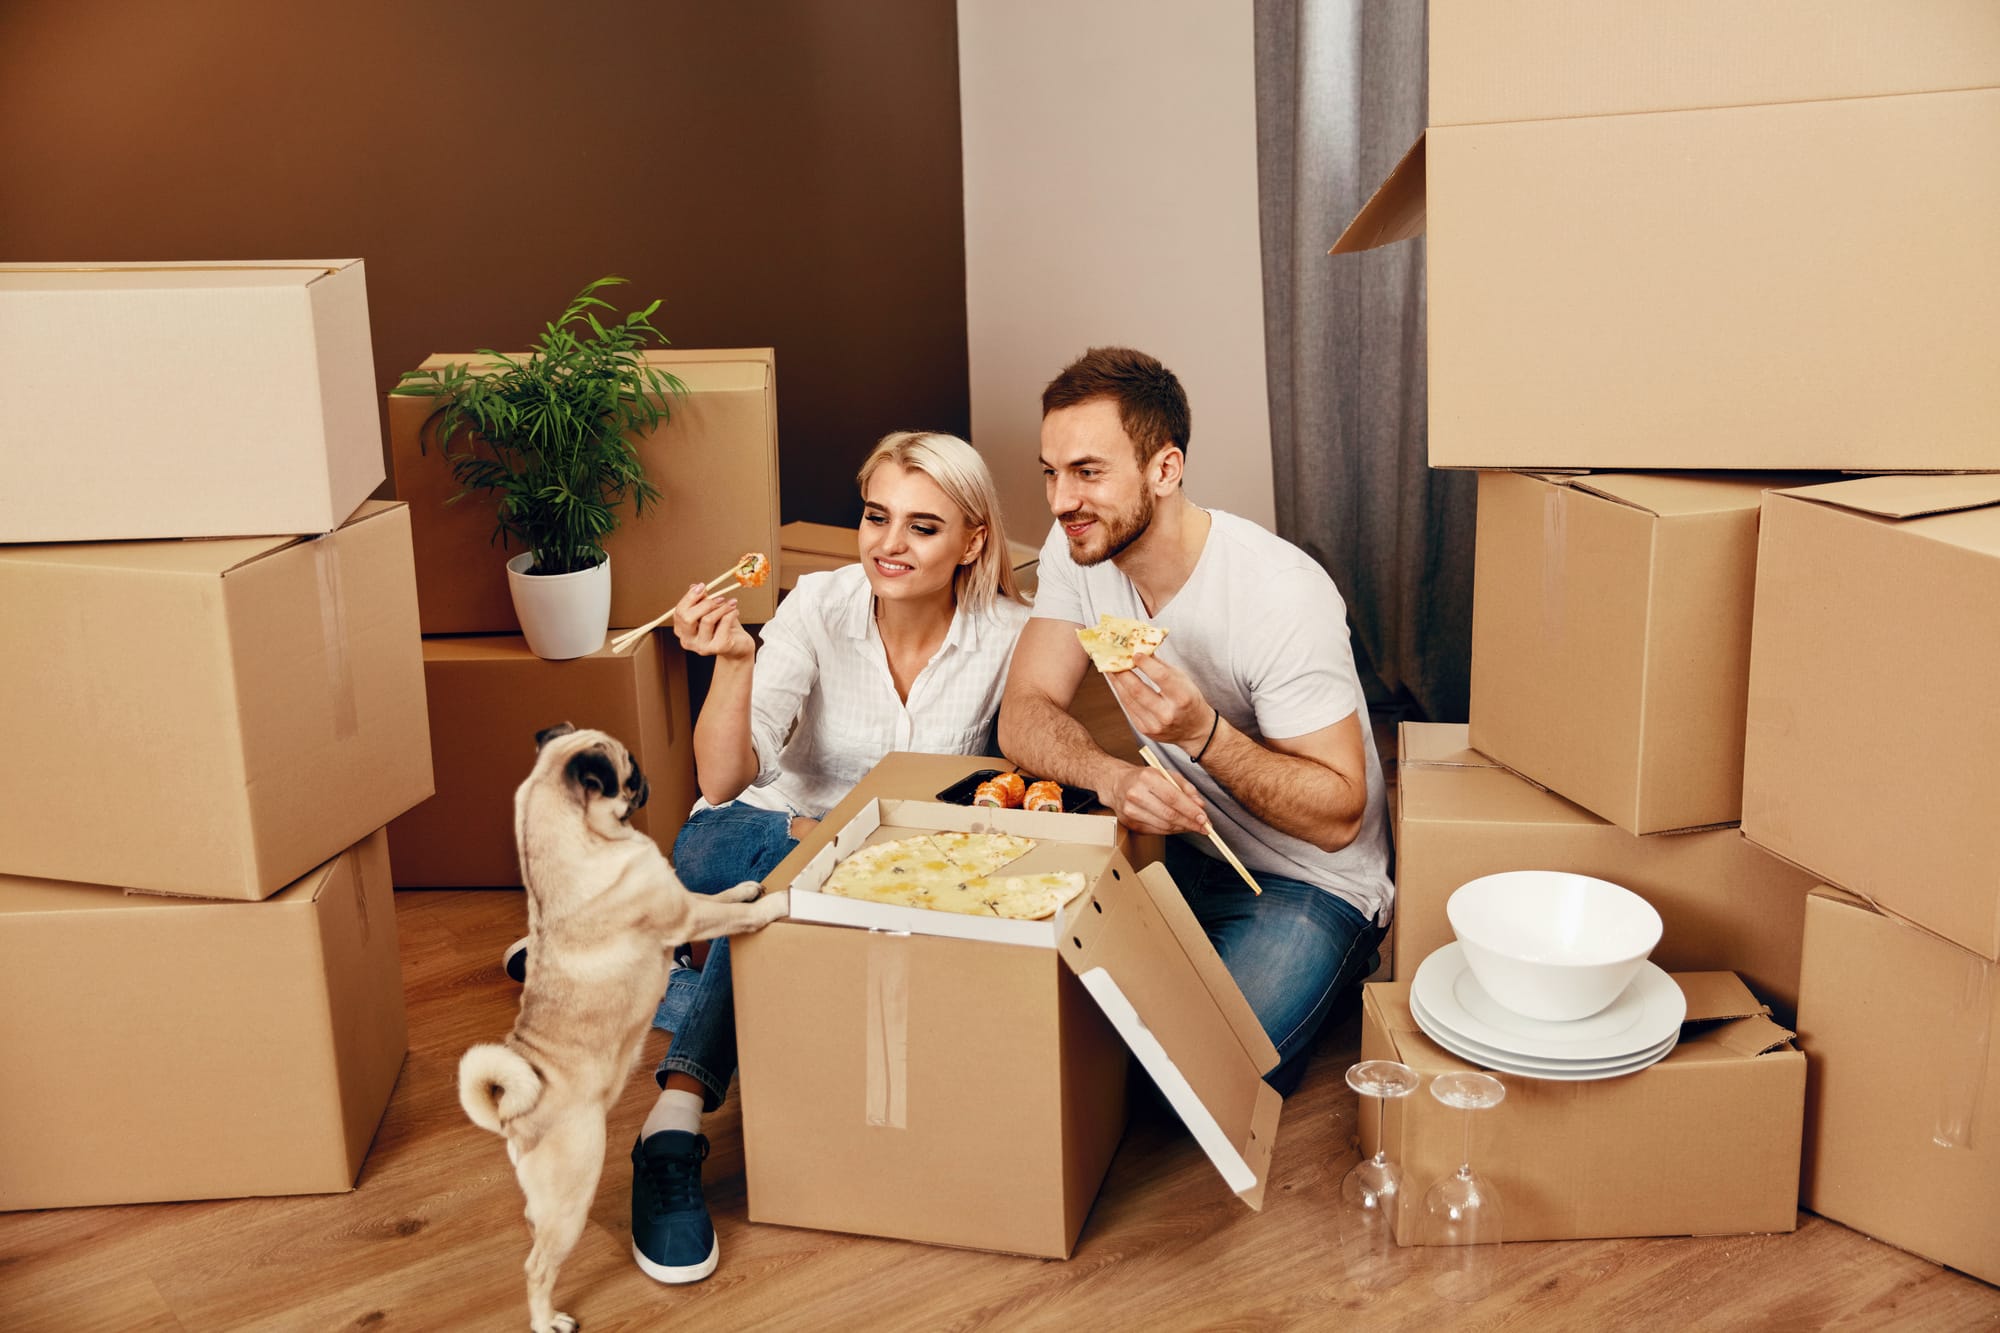 Man and woman eating with dog on moving box.